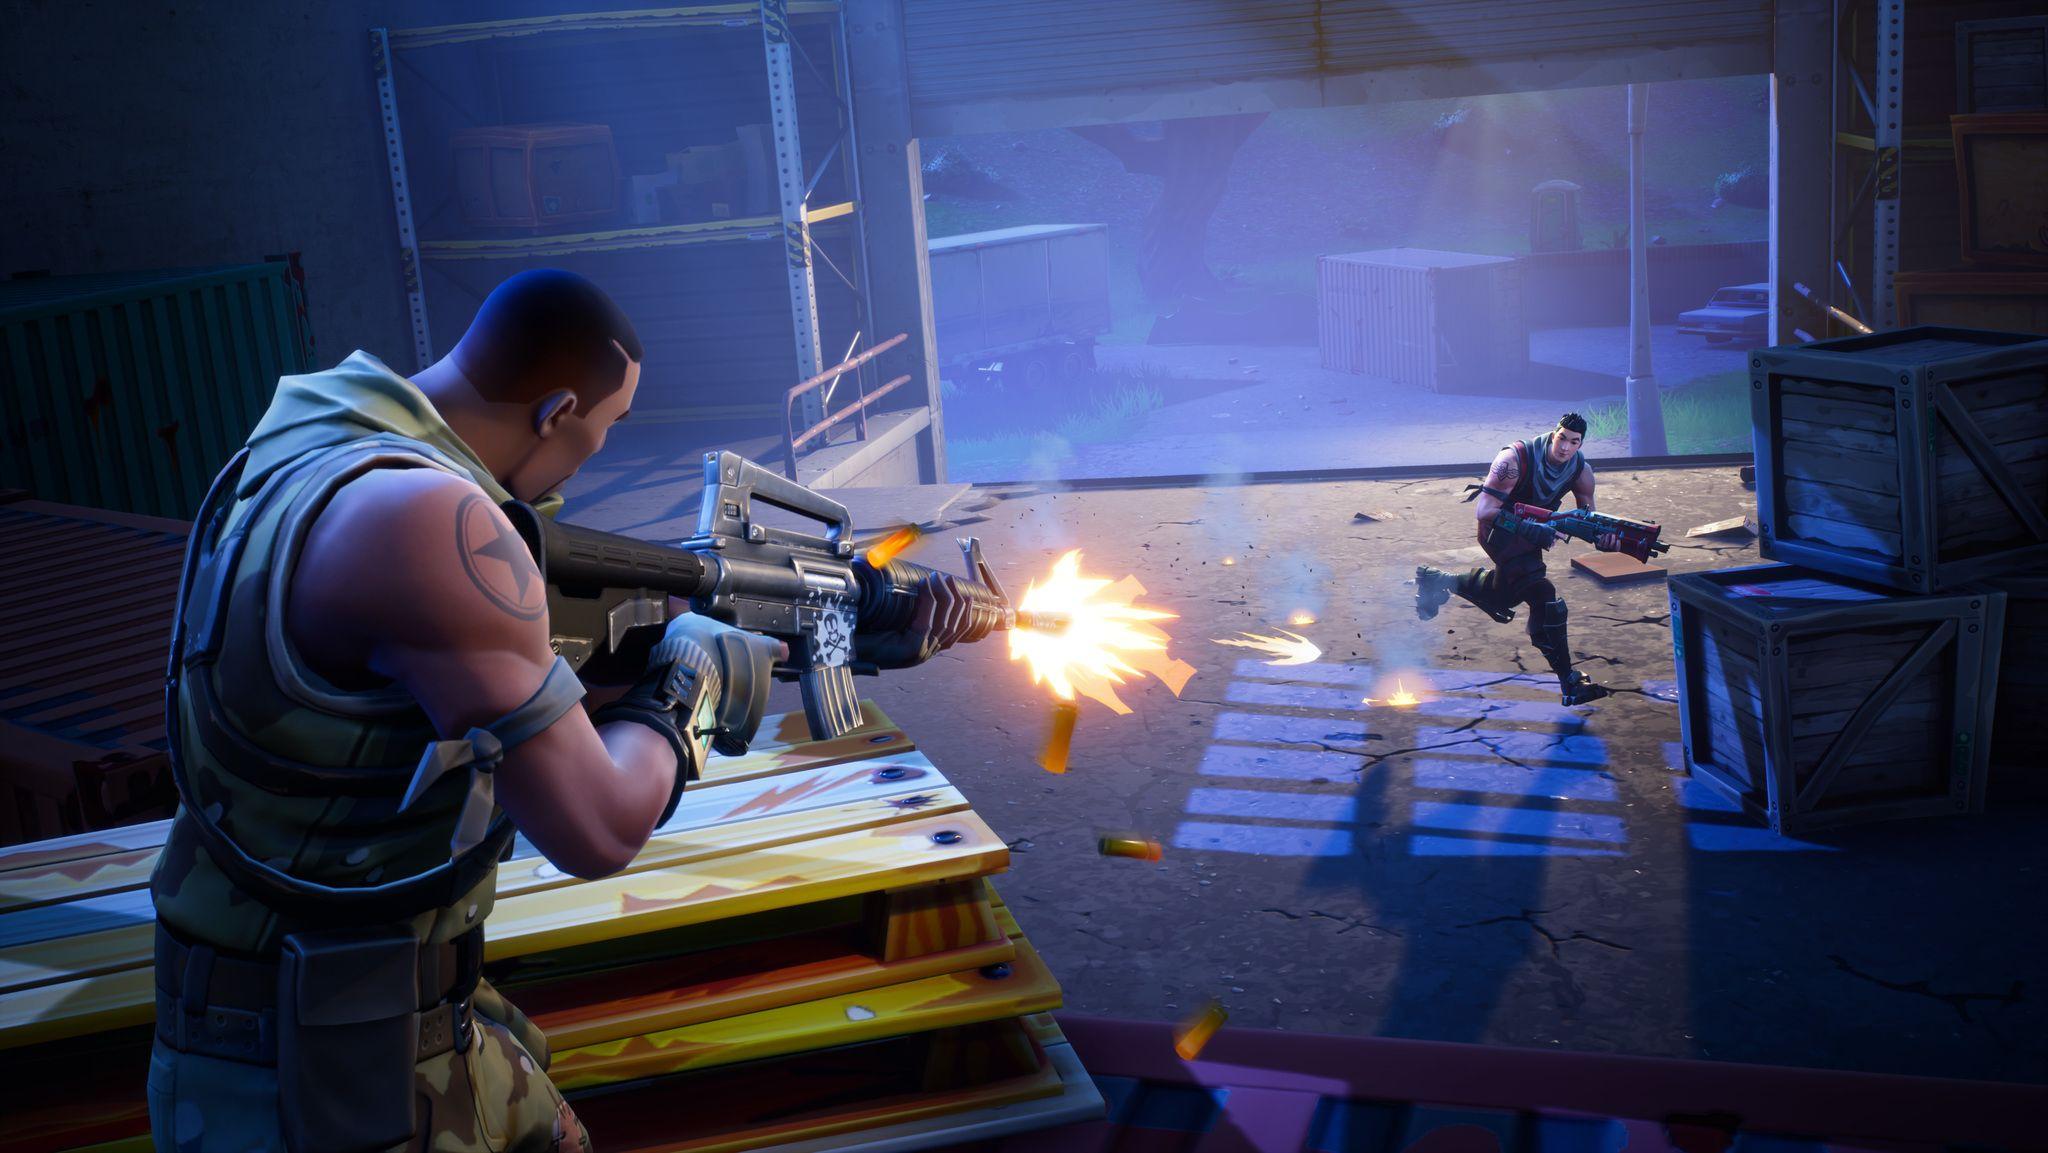 Fortnite Battle Royale' is coming to phones and tablets soon